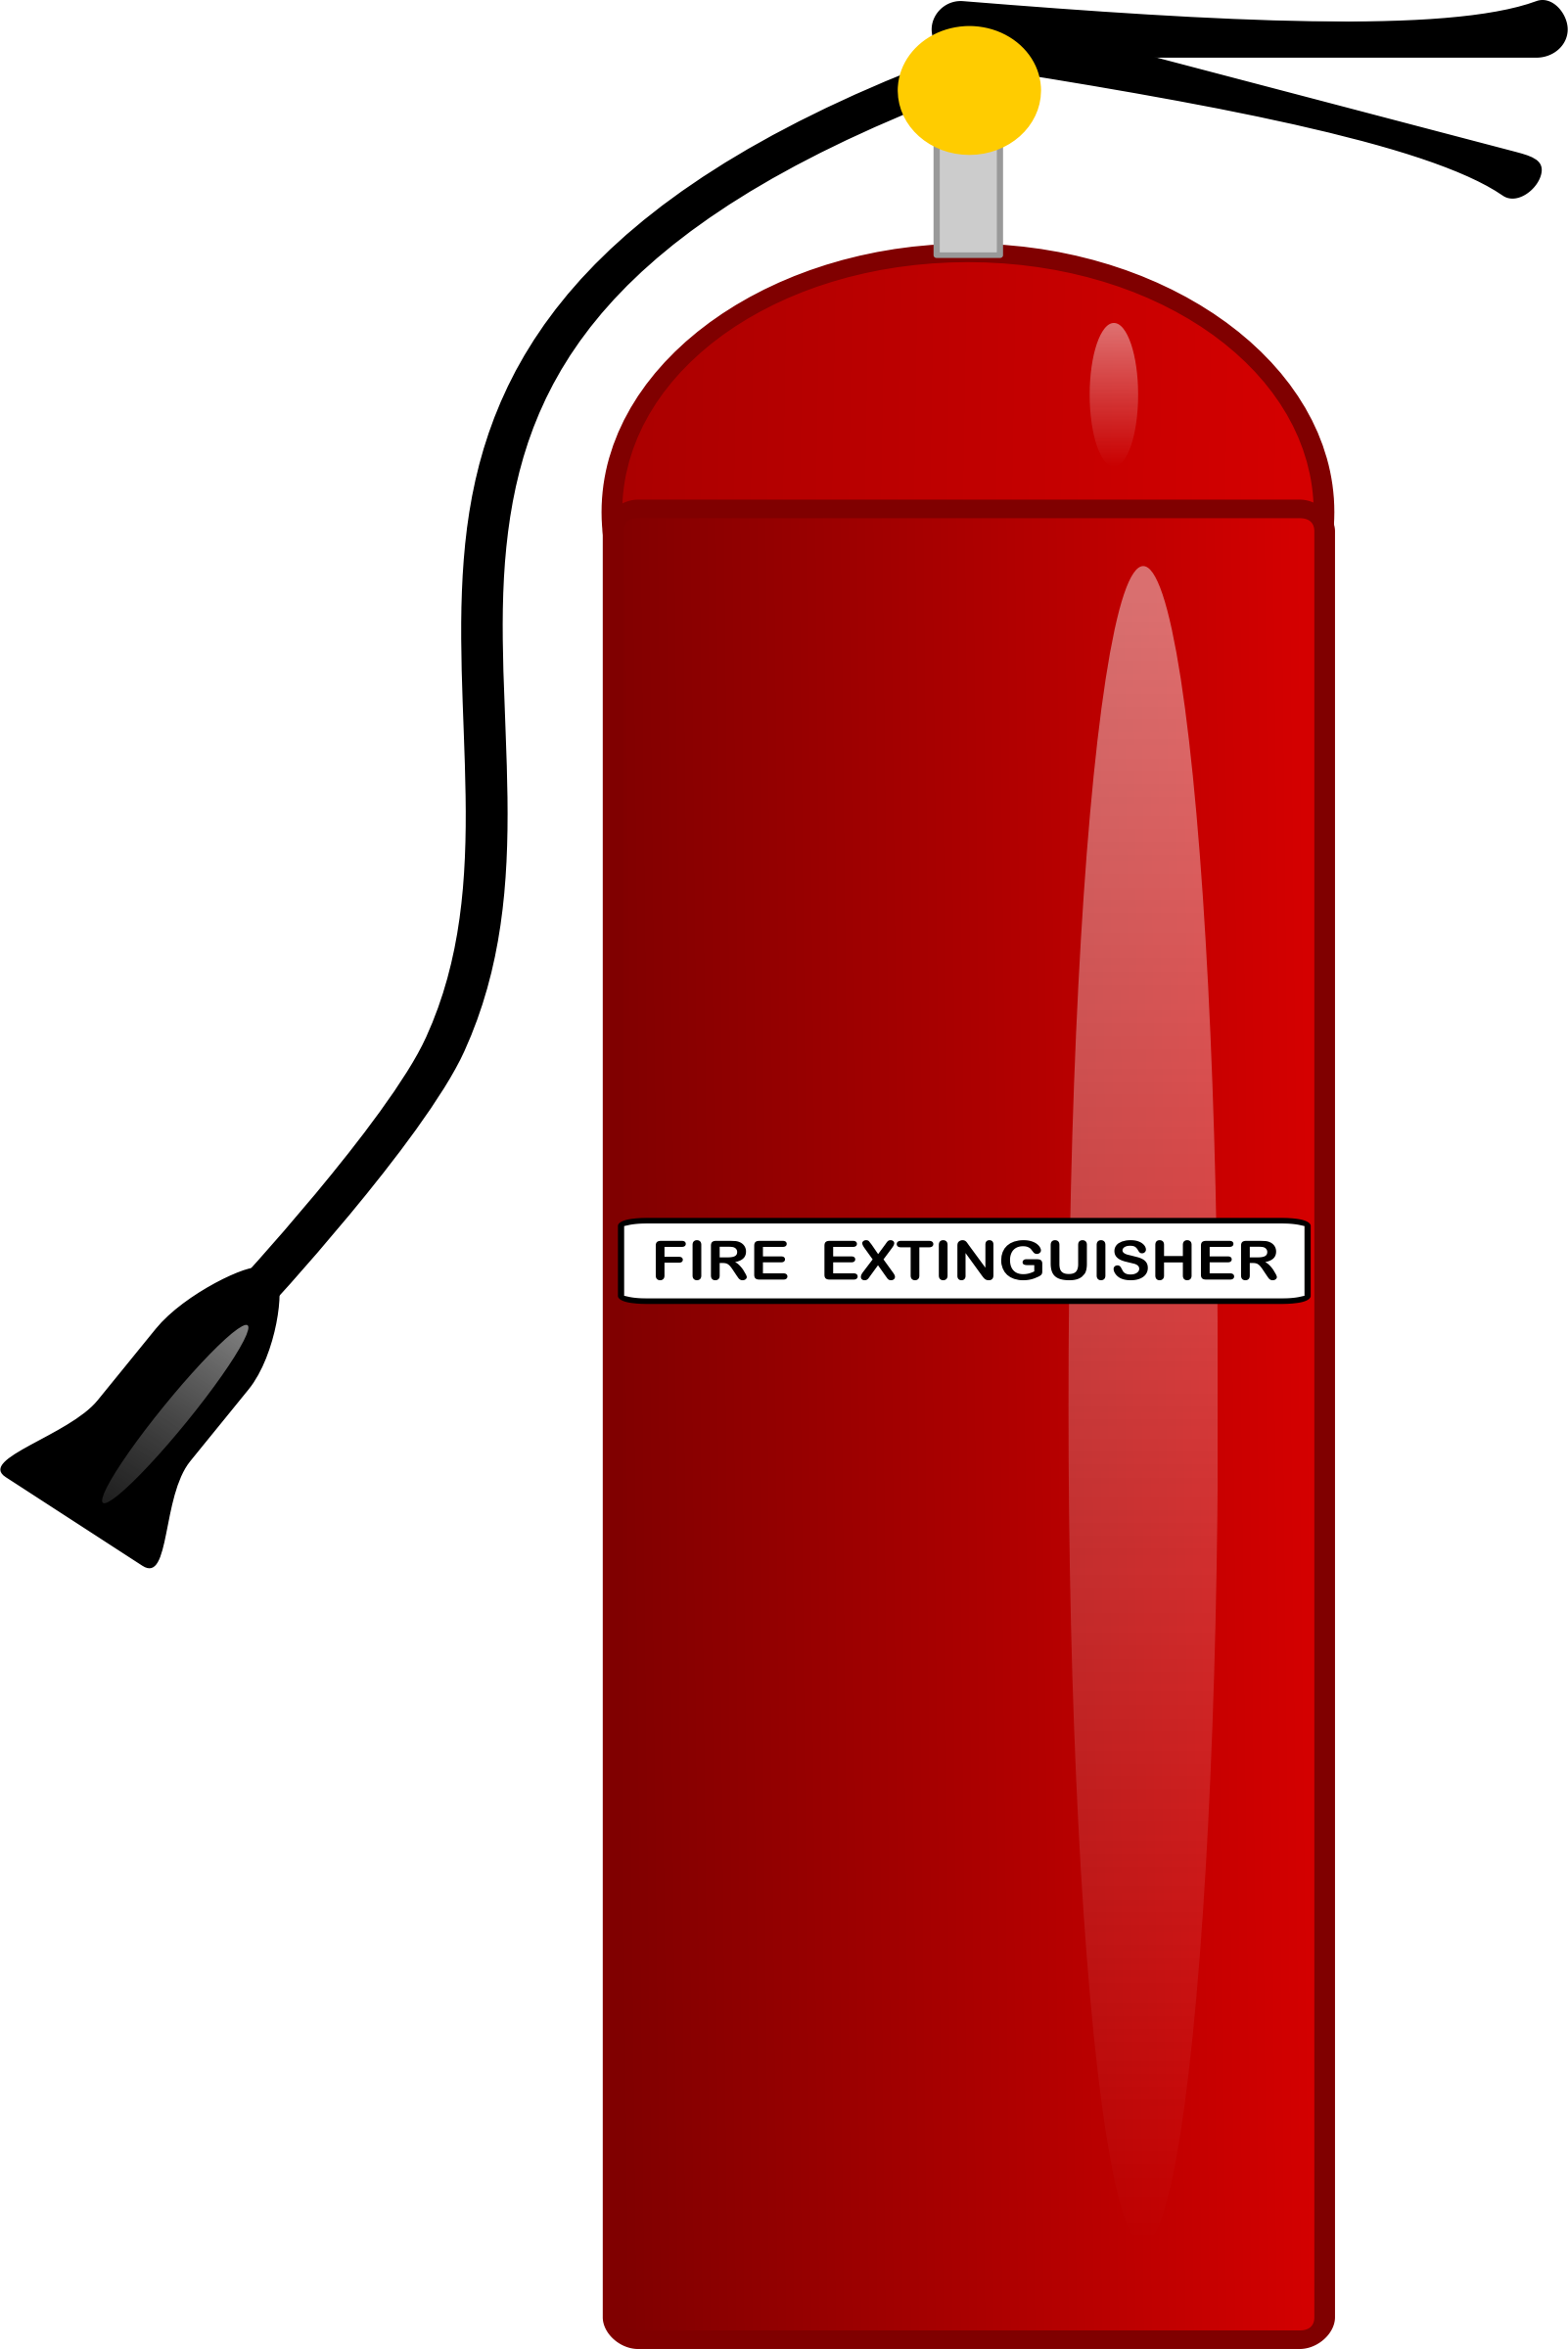 Fire Extinguisher - Clipart Fire Extinguisher